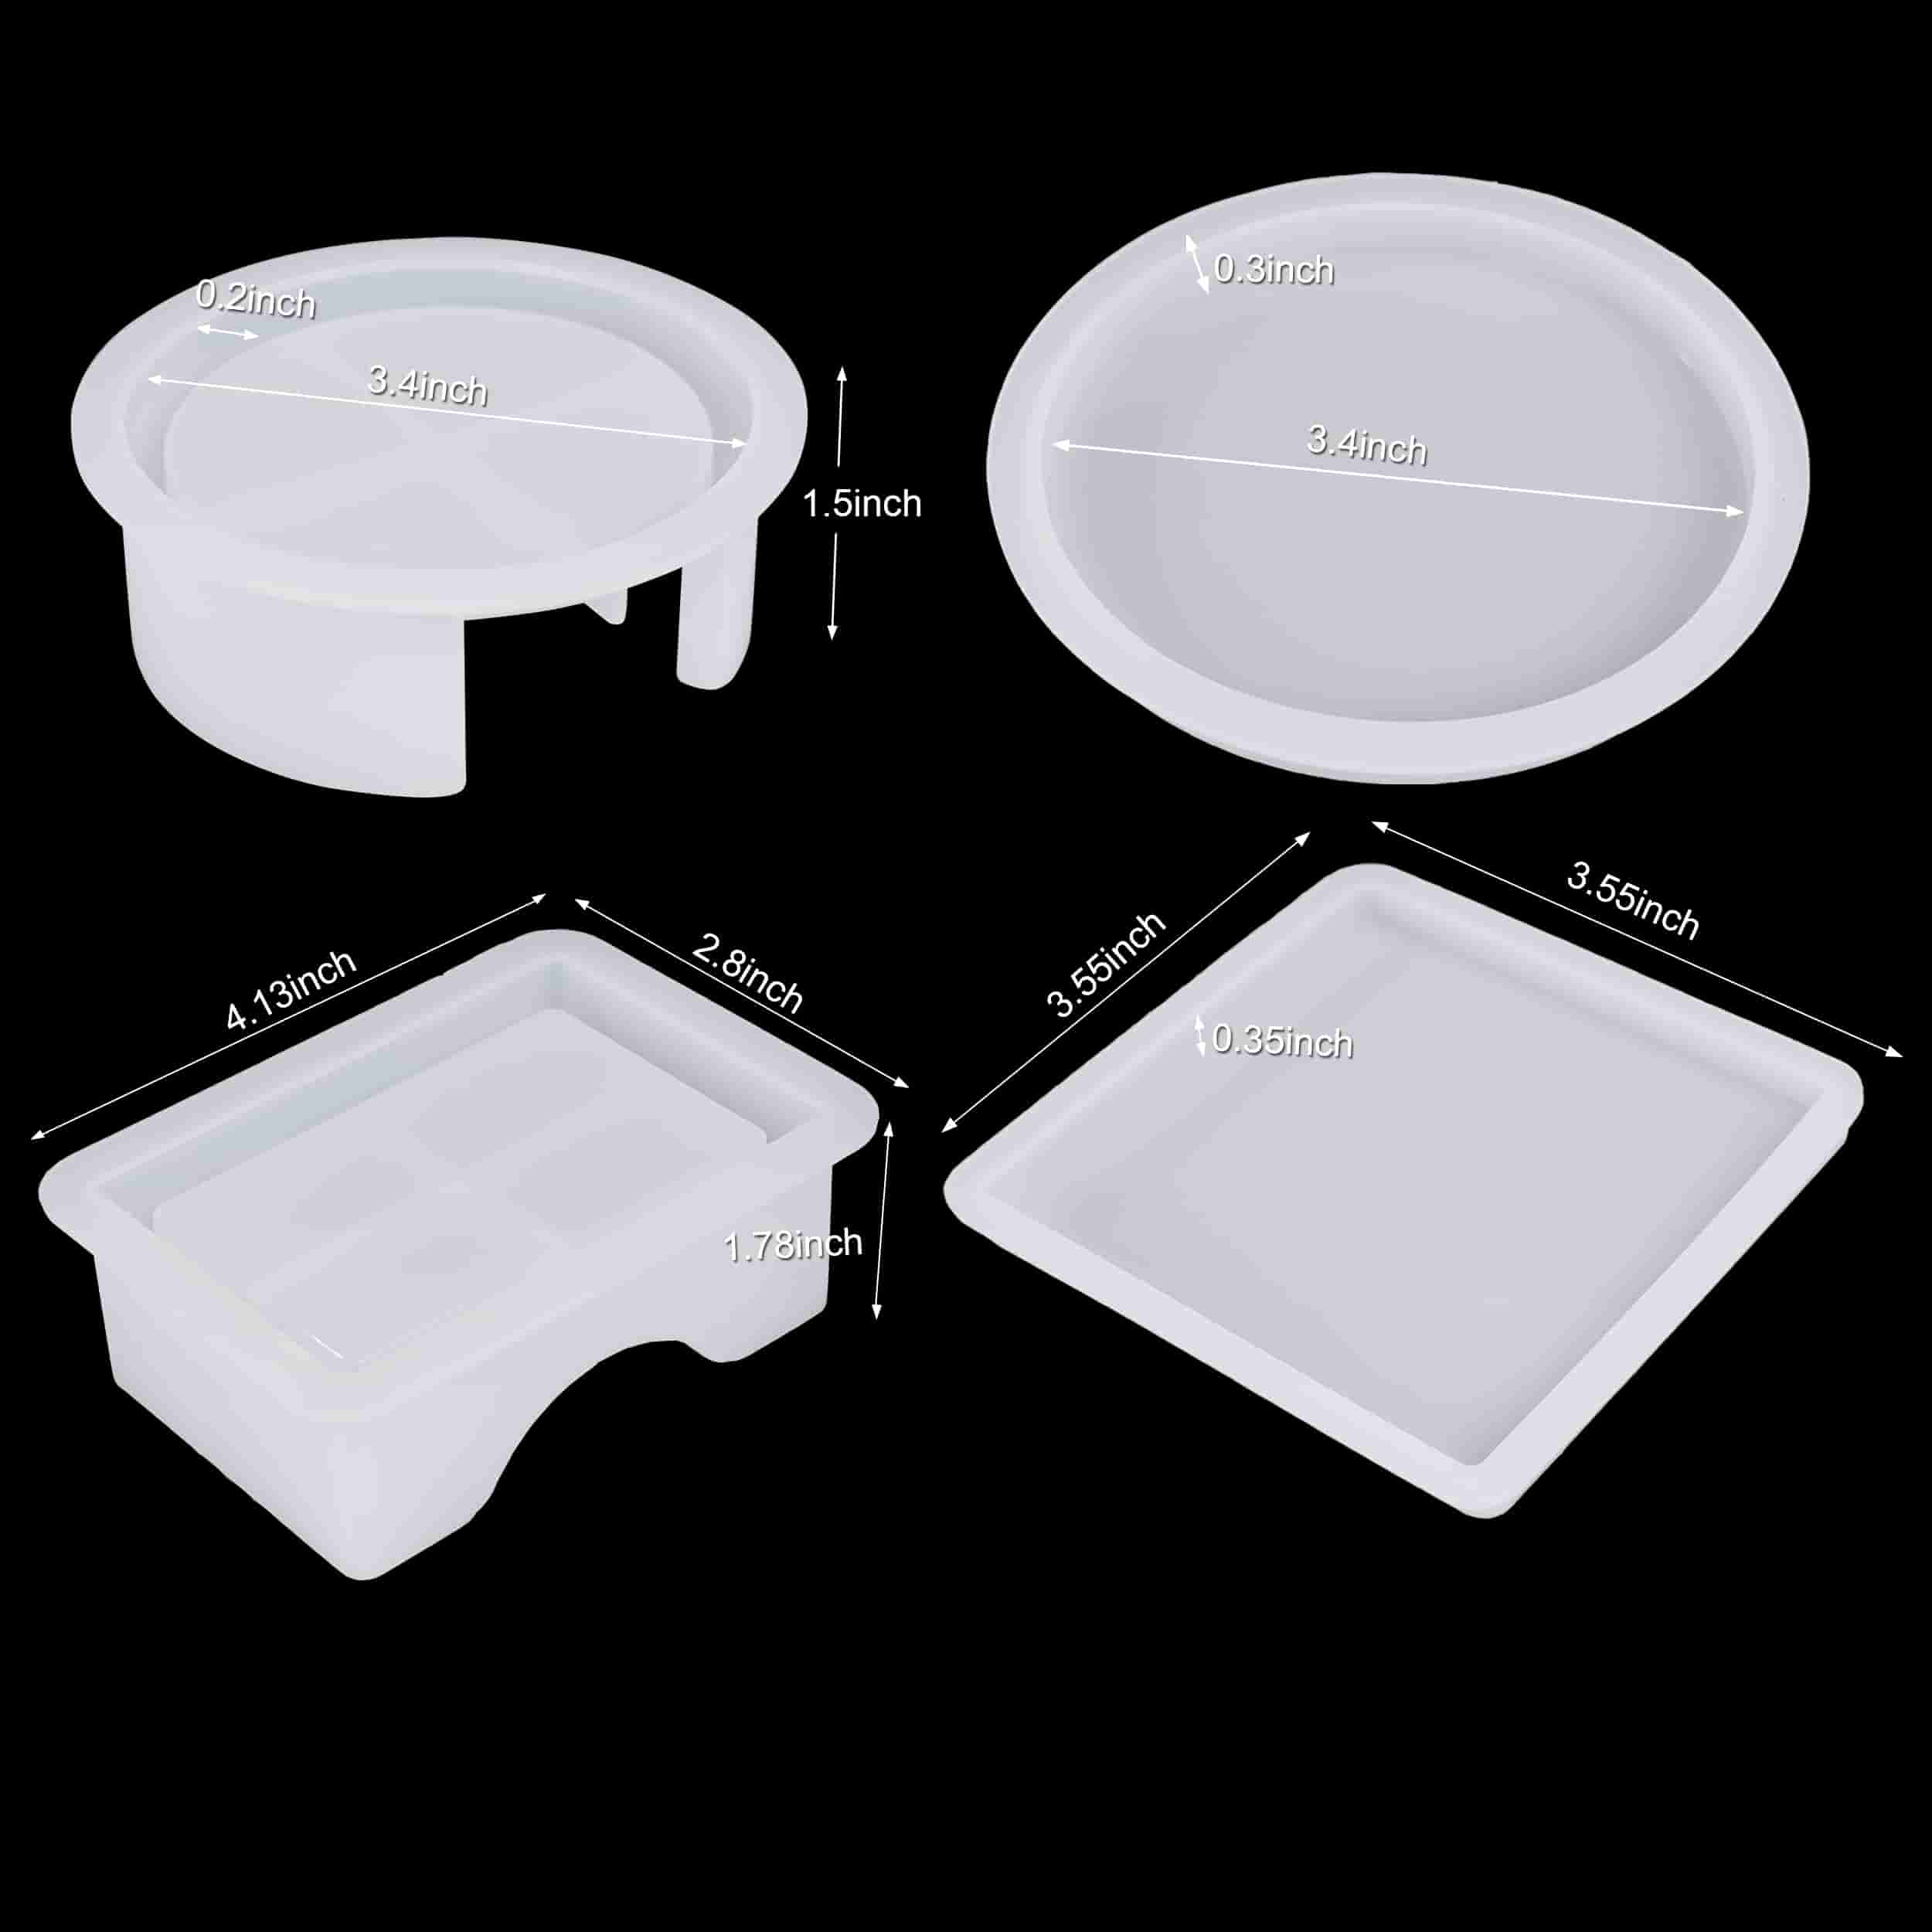 LET'S RESIN Silicone Coaster Molds, Resin Coaster Mold Kit with 10pcs  Square and Round Coaster Molds Set, Wooden Support, Coaster Holder Epoxy  Resin Molds for Resin Casting, Cups Mats, Home Decoration –